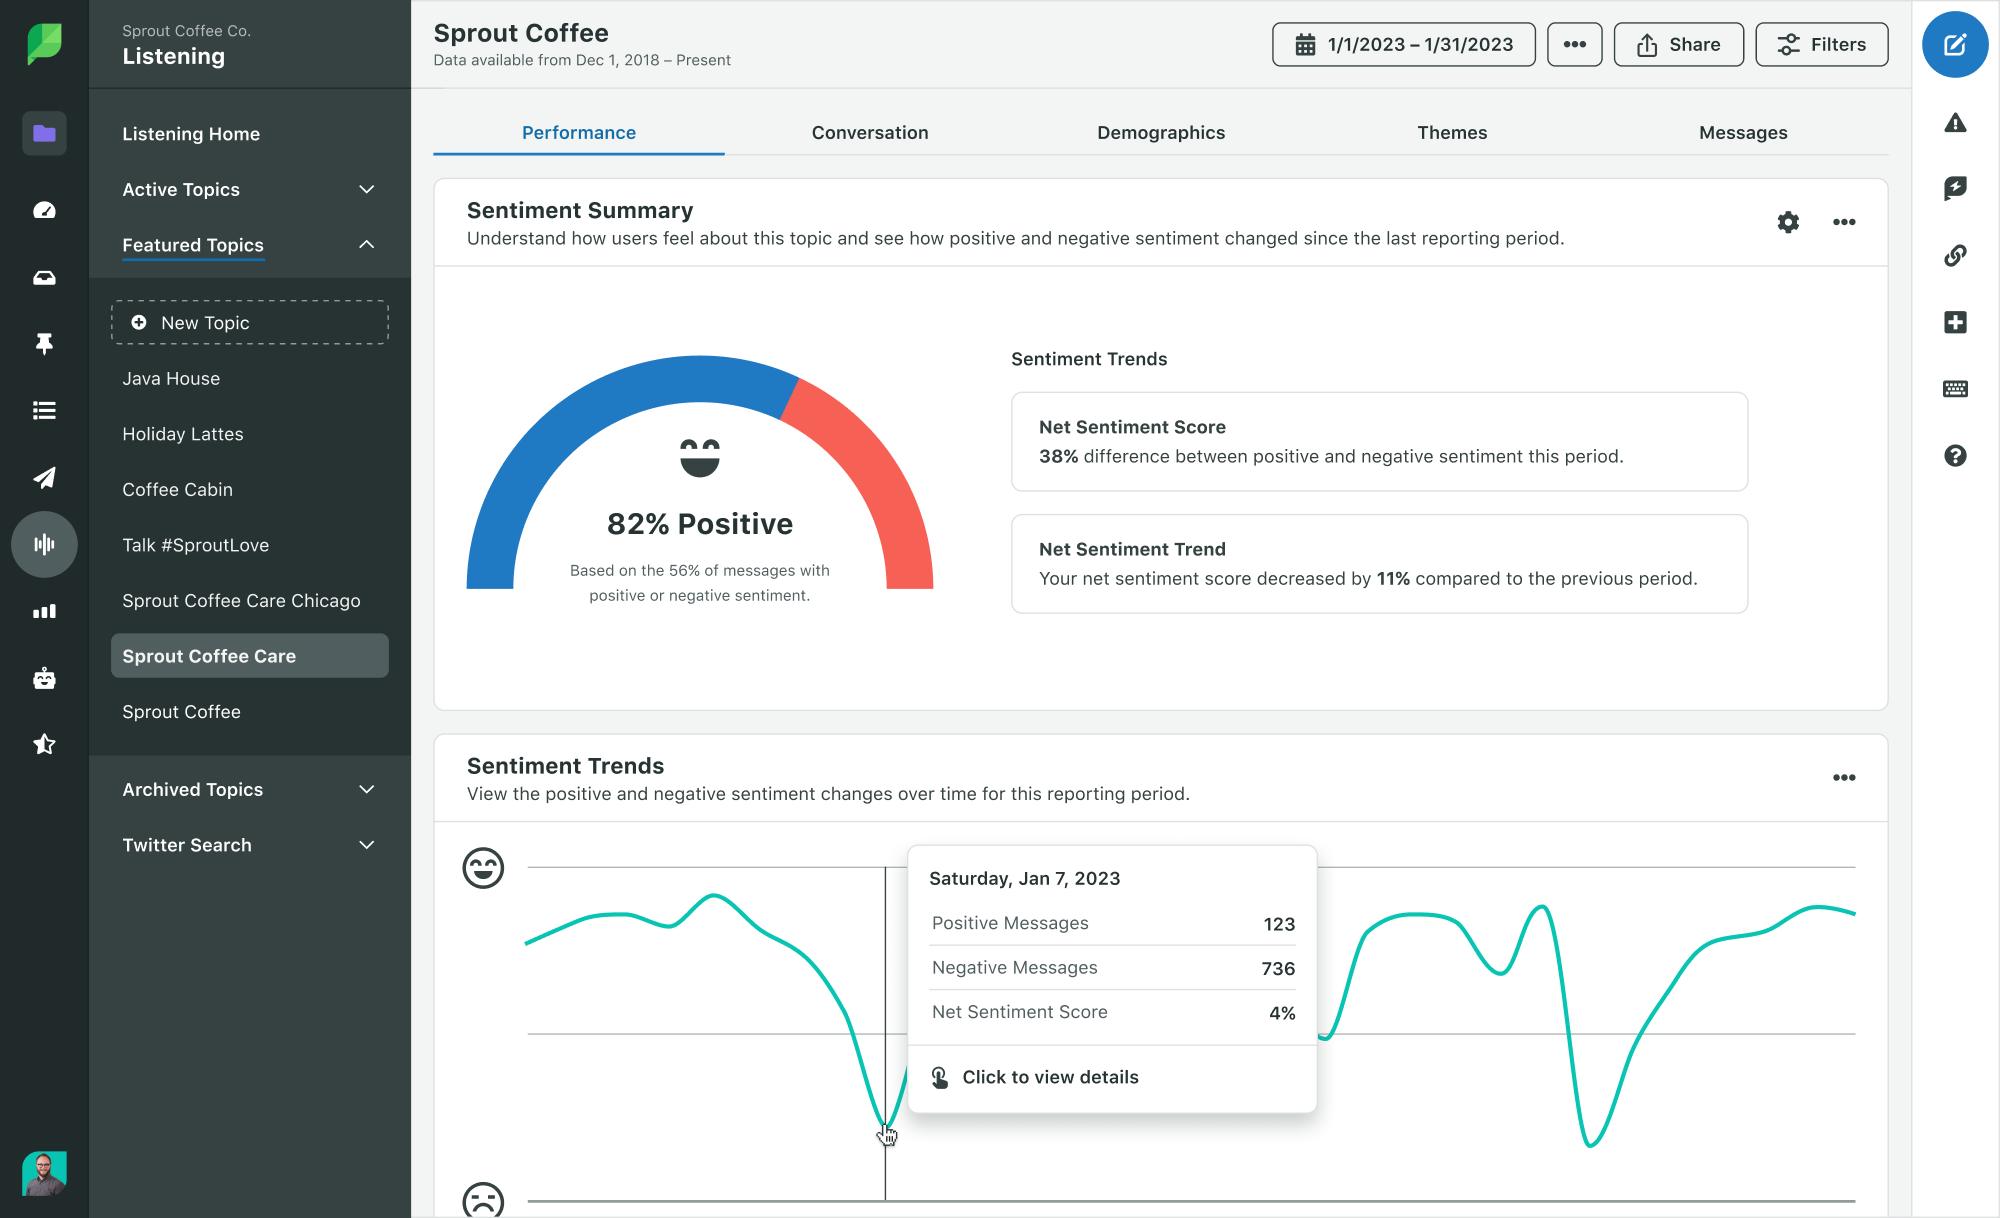 Screenshot of Sprout’s Listening performance showing net sentiment trends and scores